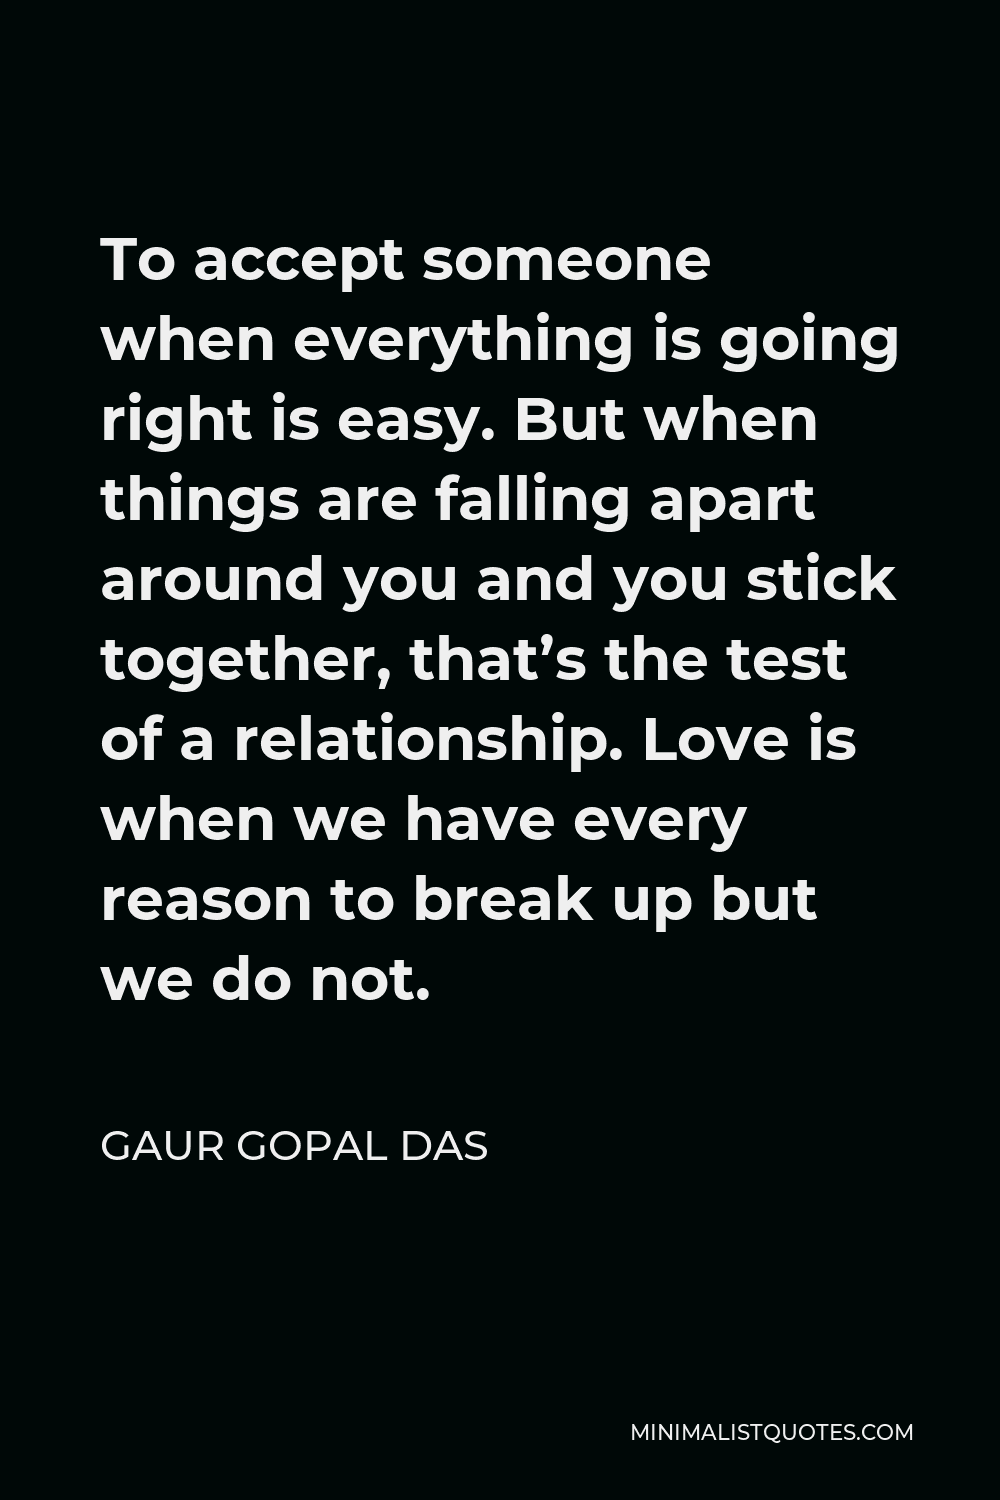 Gaur Gopal Das Quote - To accept someone when everything is going right is easy. But when things are falling apart around you and you stick together, that’s the test of a relationship. Love is when we have every reason to break up but we do not.